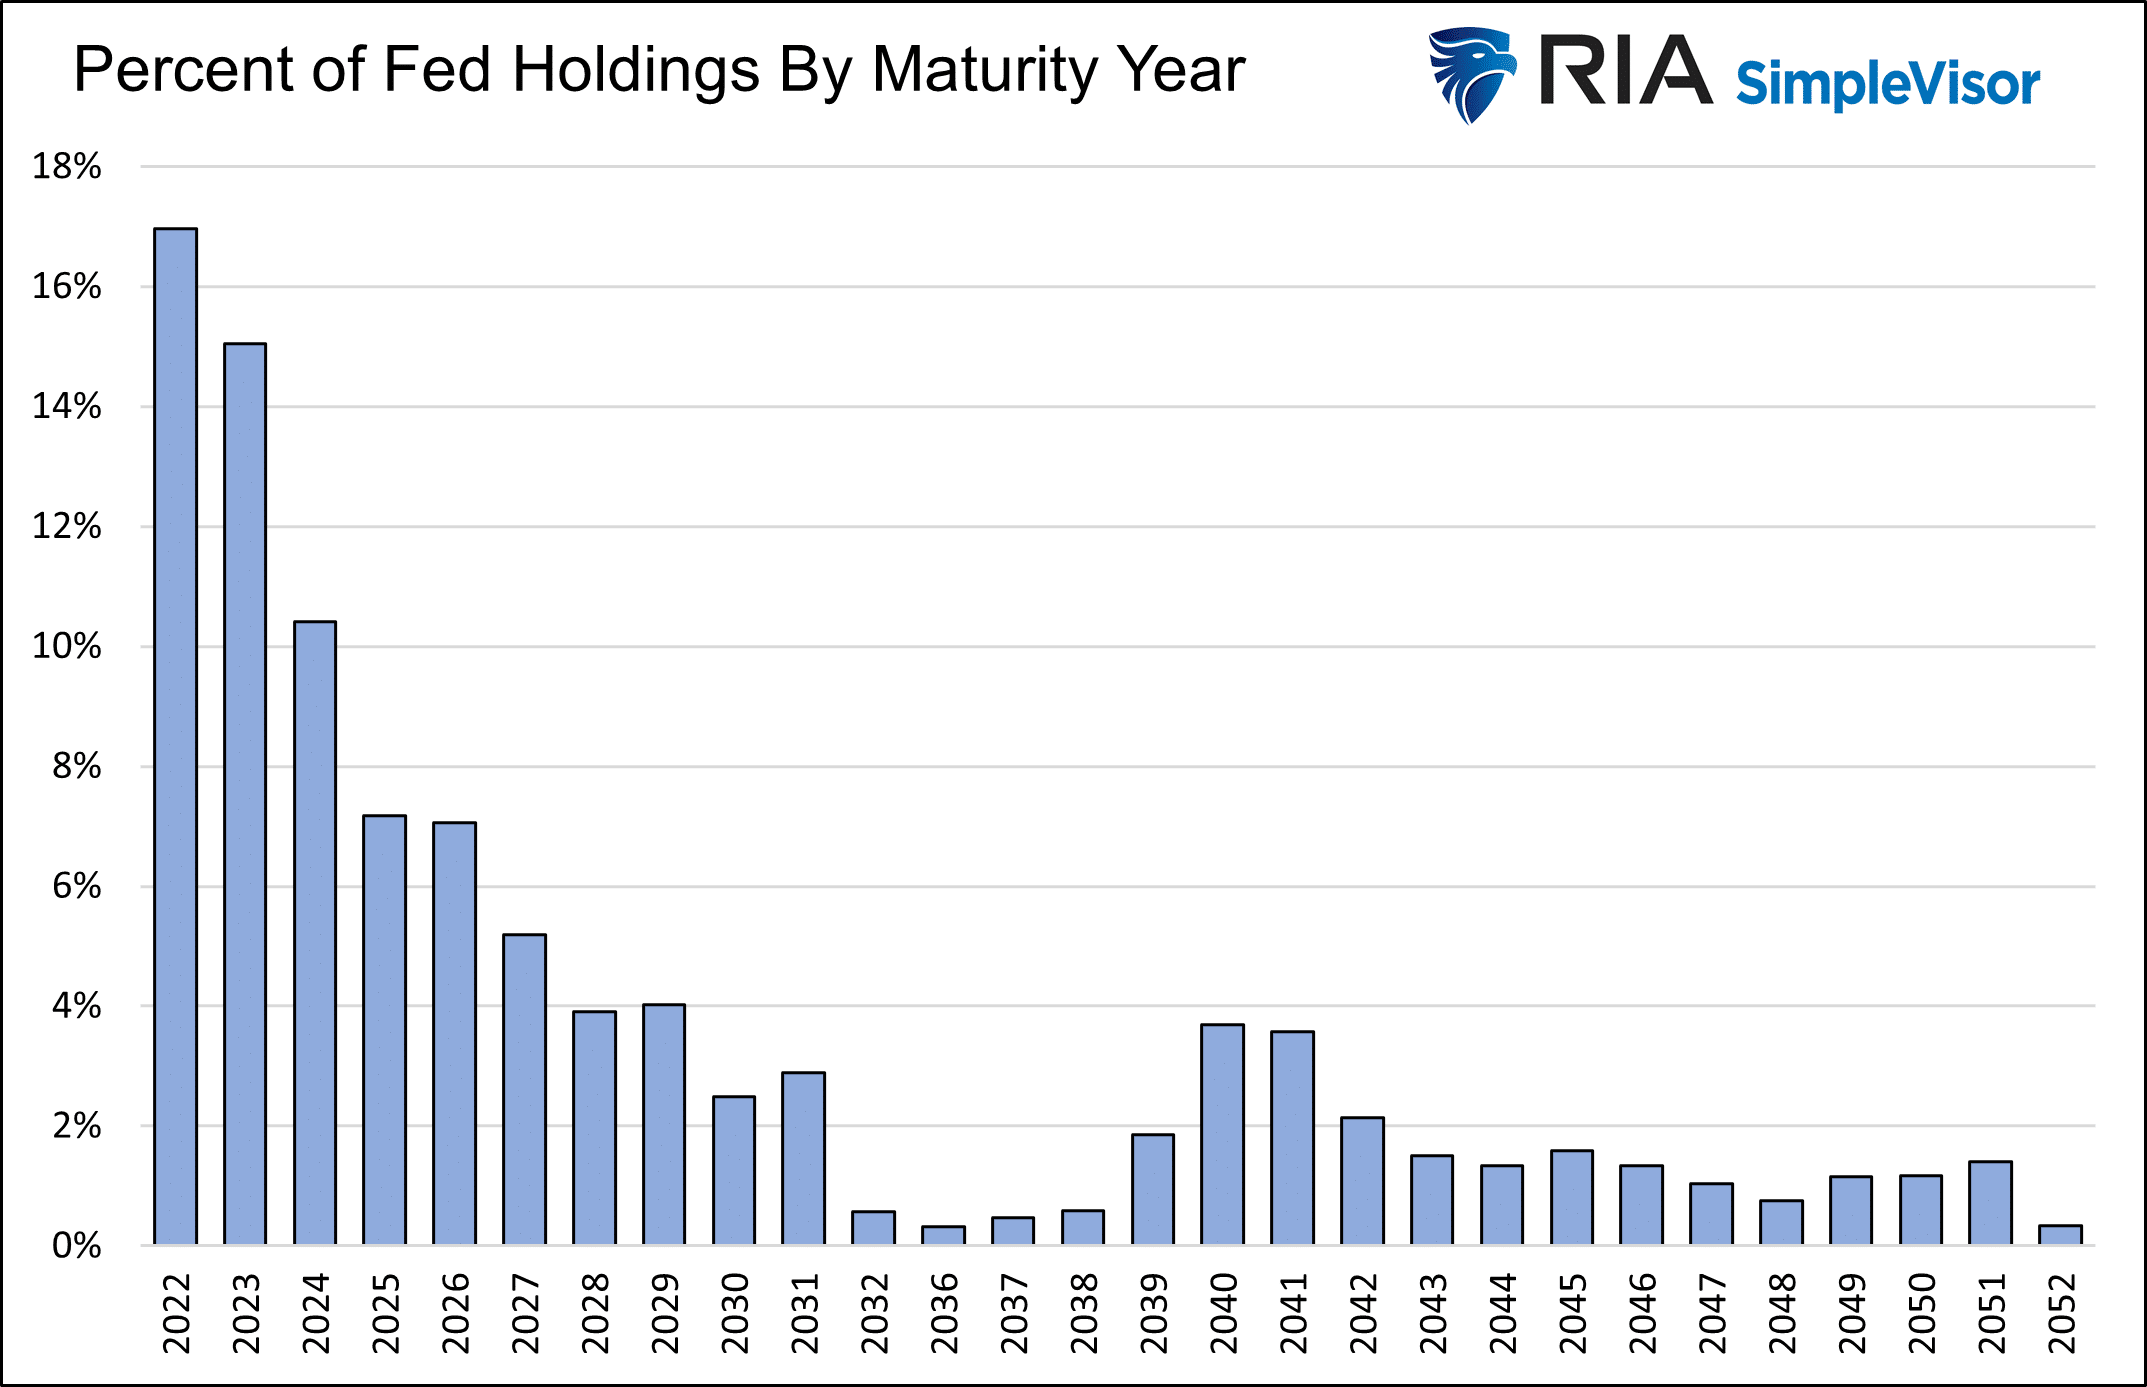 Fed Holdings By Maturity Year